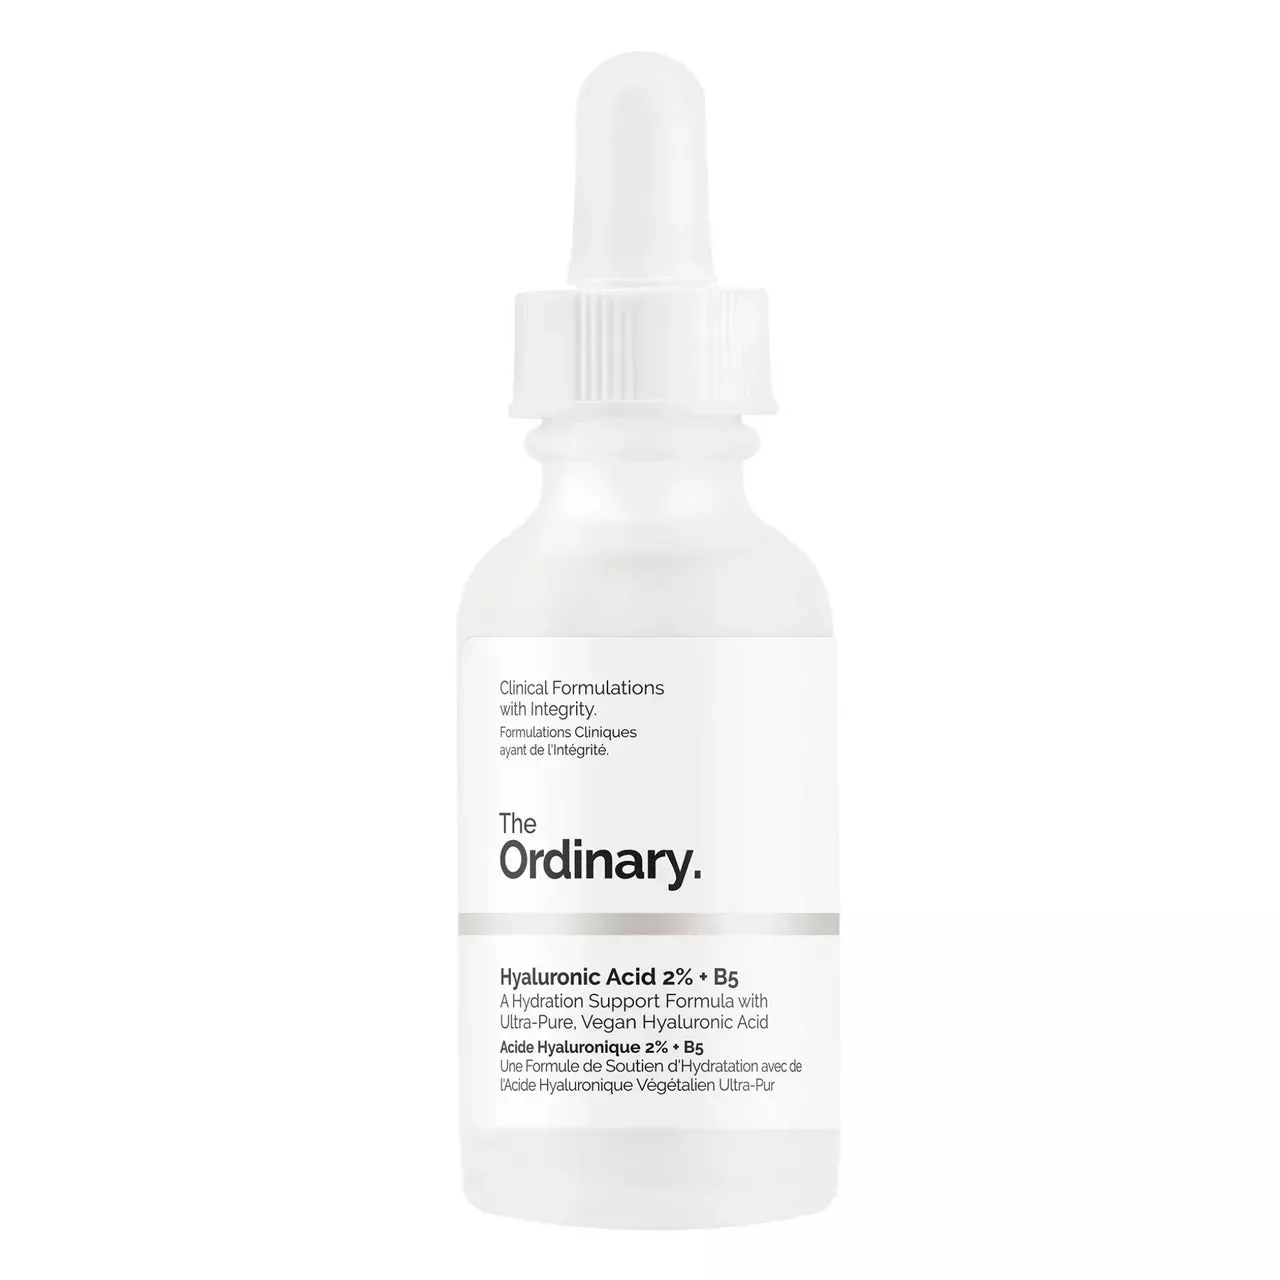 Best Hyaluronic Acid Serums 2021: The Ordinary Hyaluronic Acid 2% + B5 on a white background